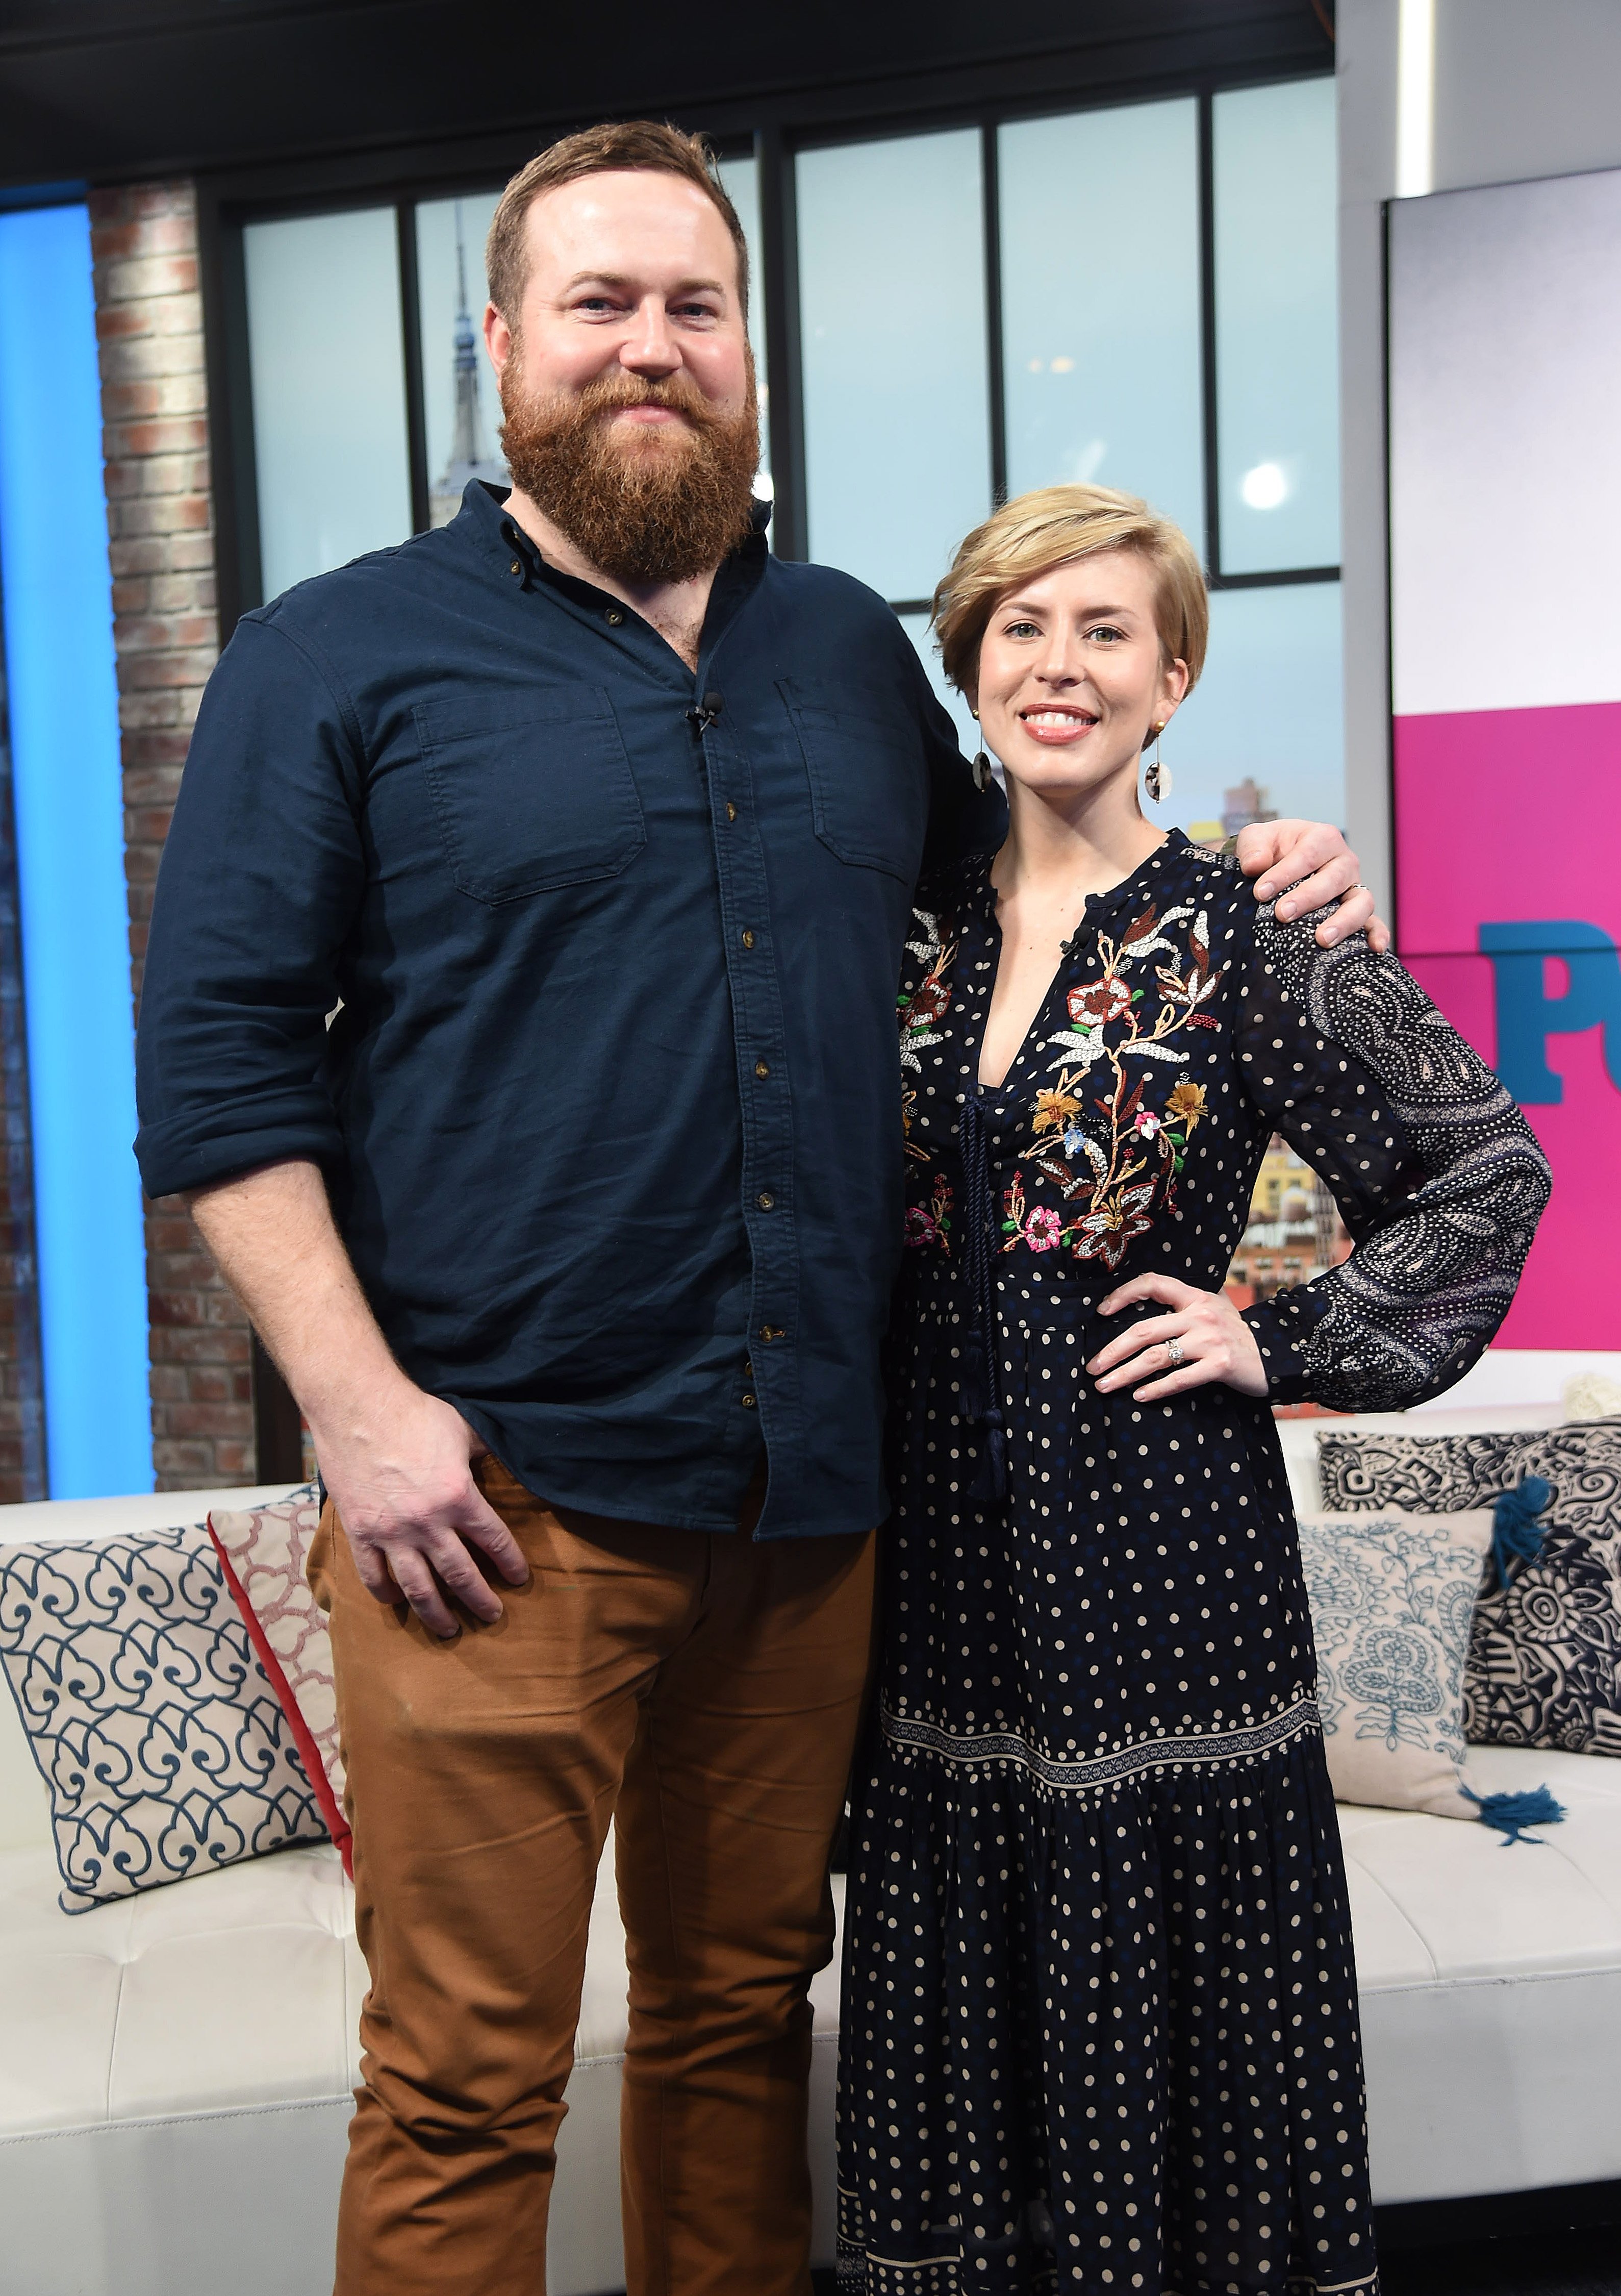 HGTV "Home Town" stars Ben Napier and Erin Napier visit People Now on January 08, 2020 in New York City. | Source: Getty Images